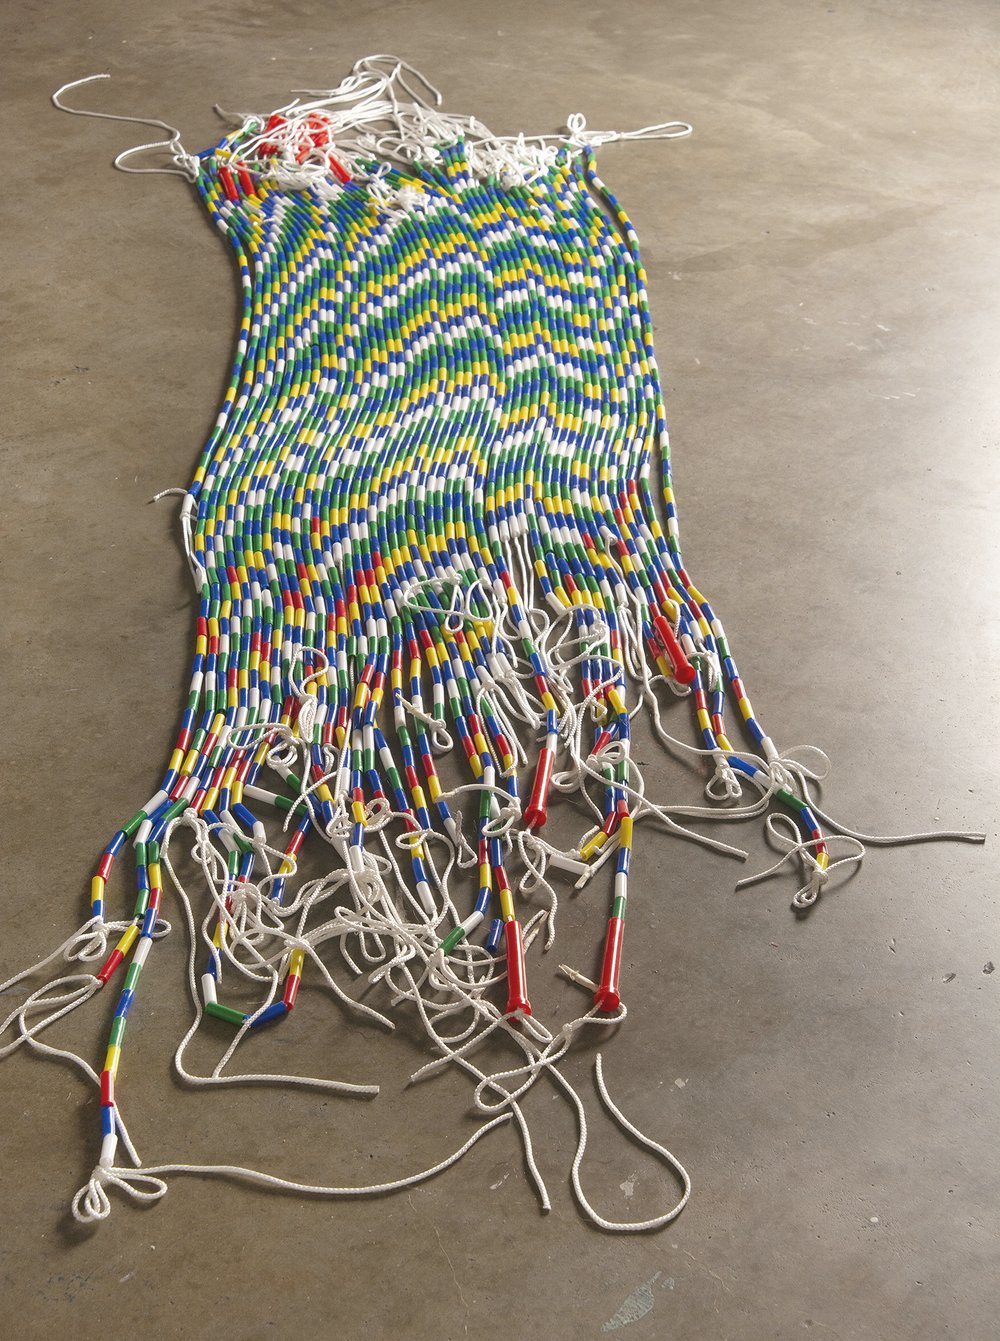  Quinci Baker,  Recess Weave,  2022, Hand-beaded jump ropes, 90 x 32 inches (approx.). 